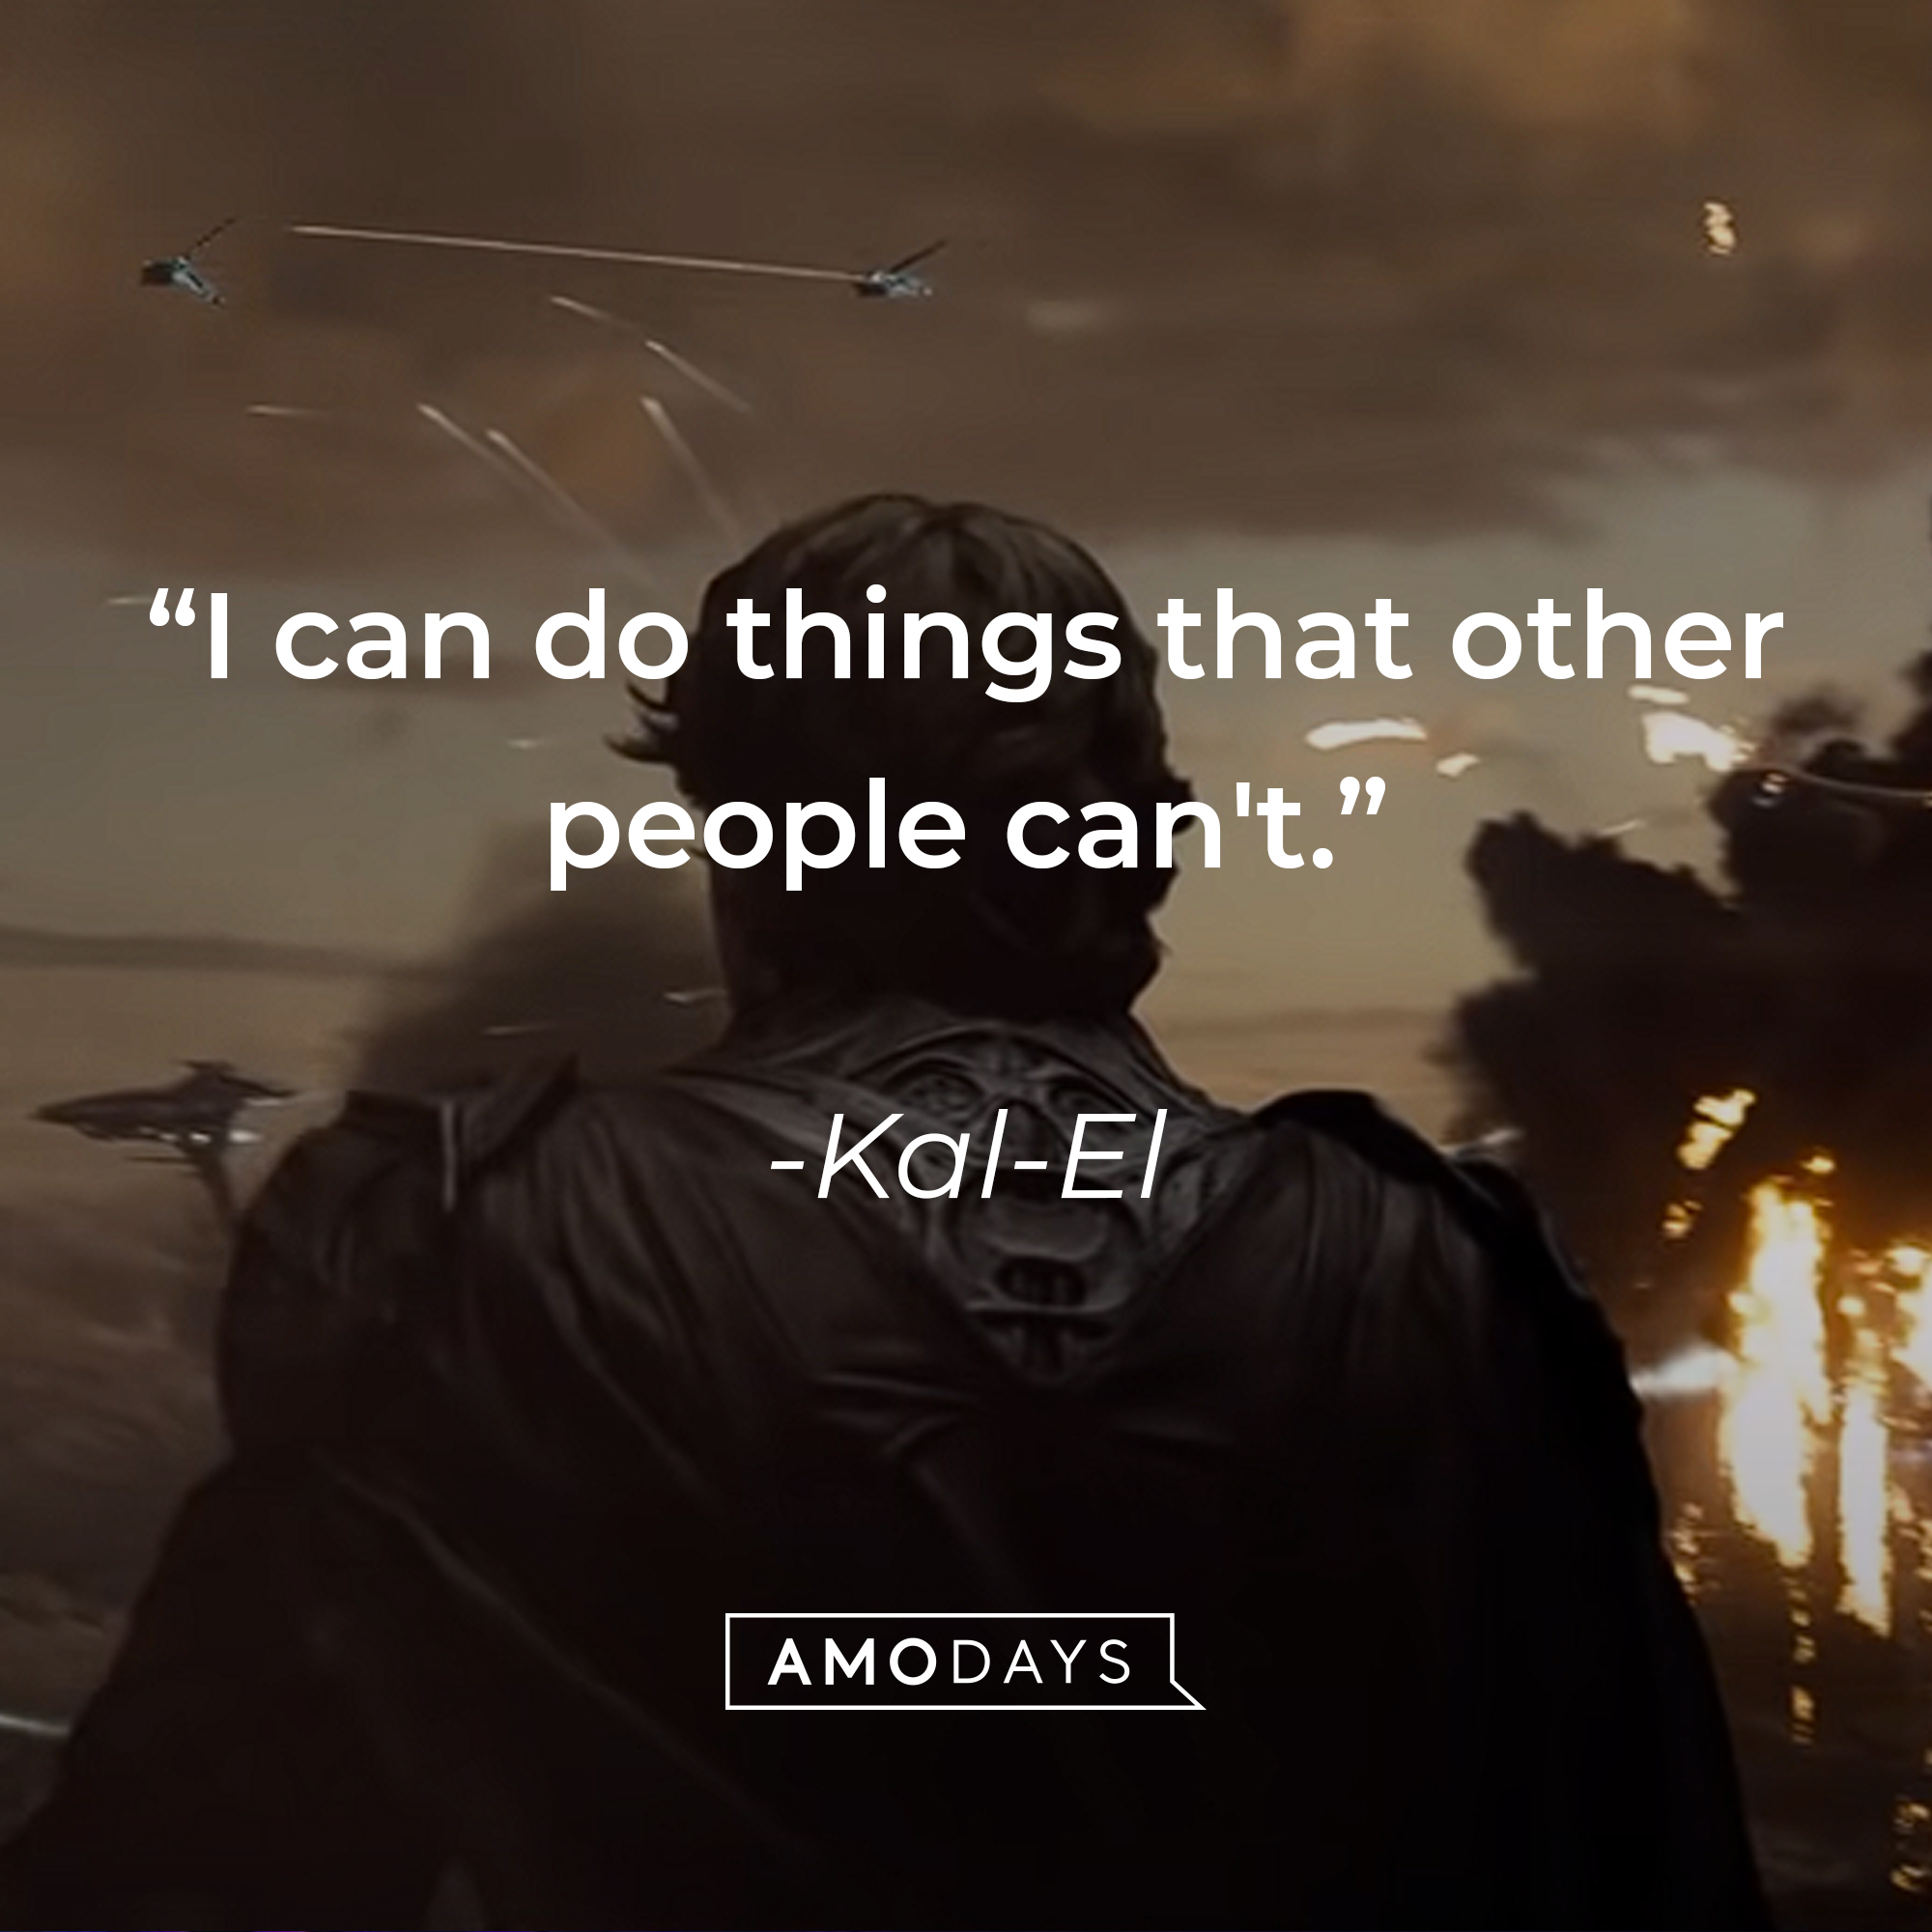 Kal-El's quote: "I can do things that other people can't." | Source: Youtube.com/WarnerBrosPictures